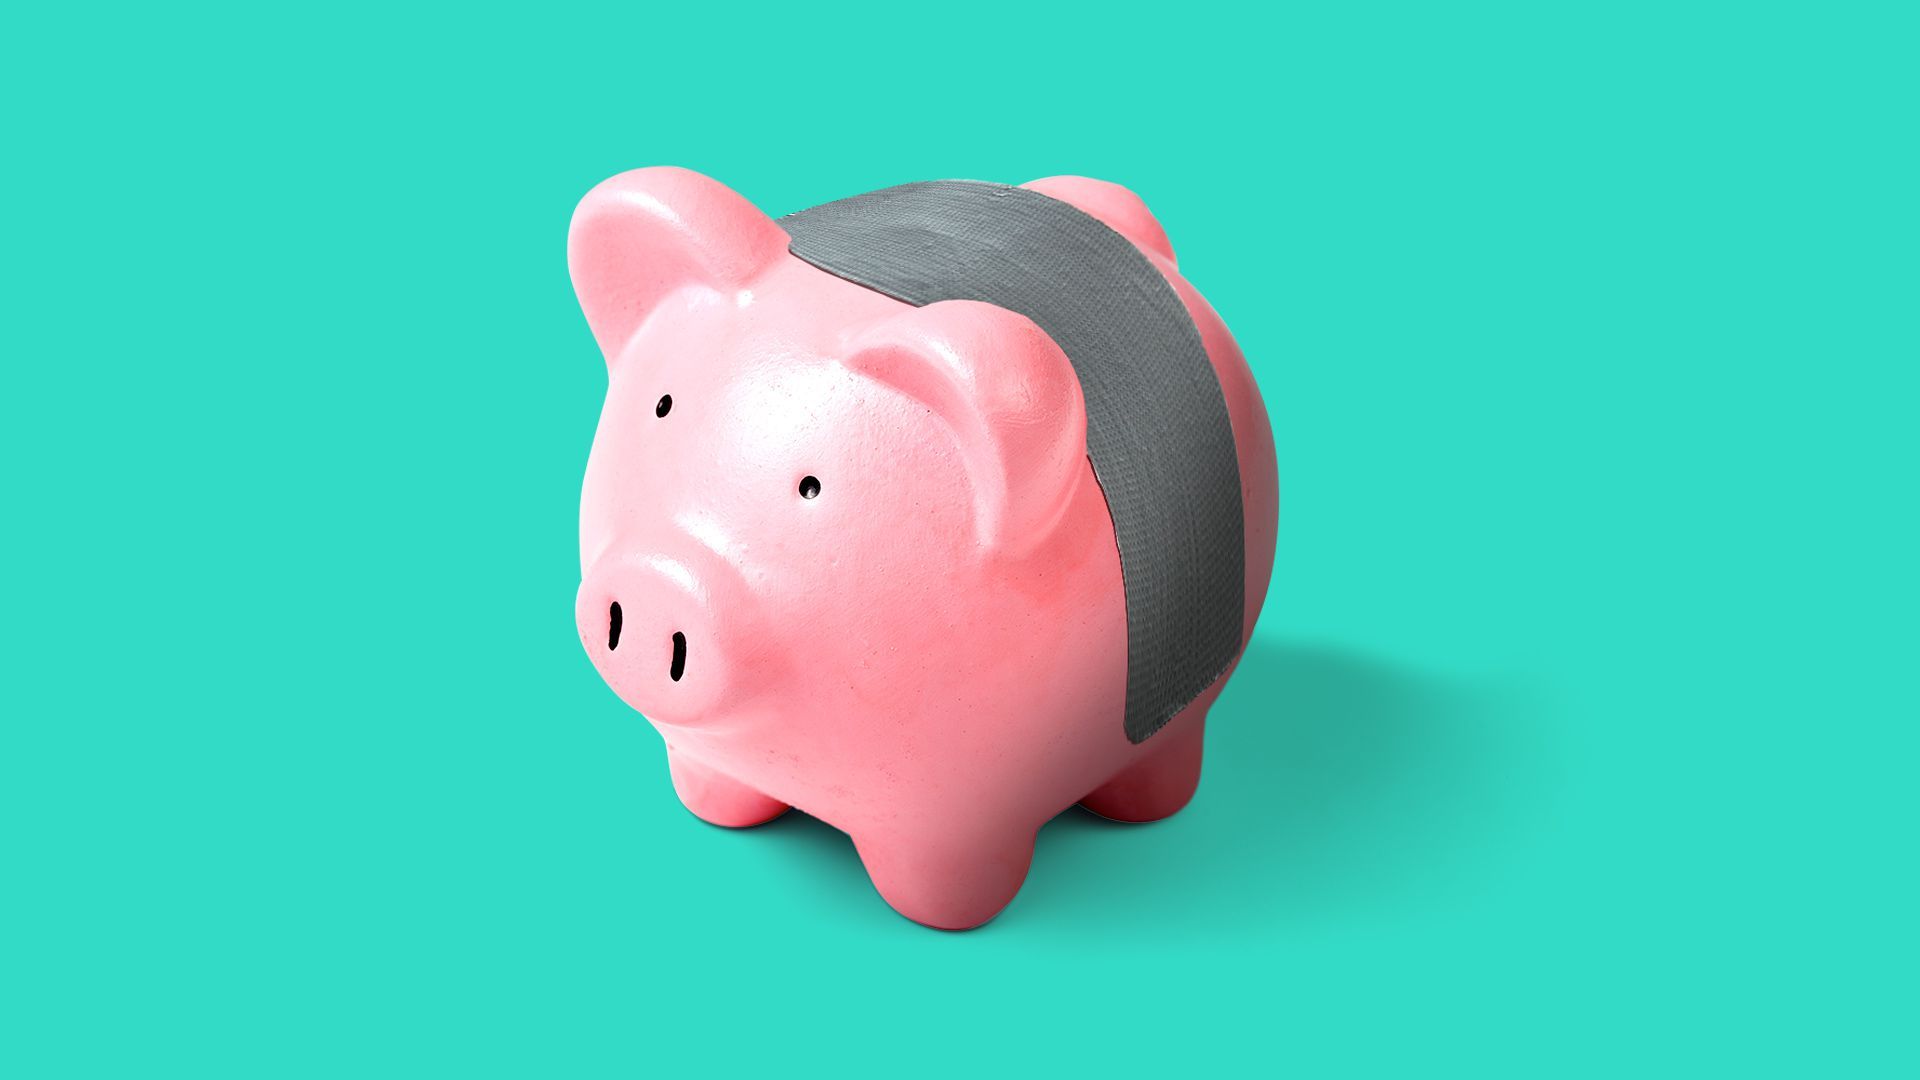 Illustration of a piggy bank with tape over the slot. 